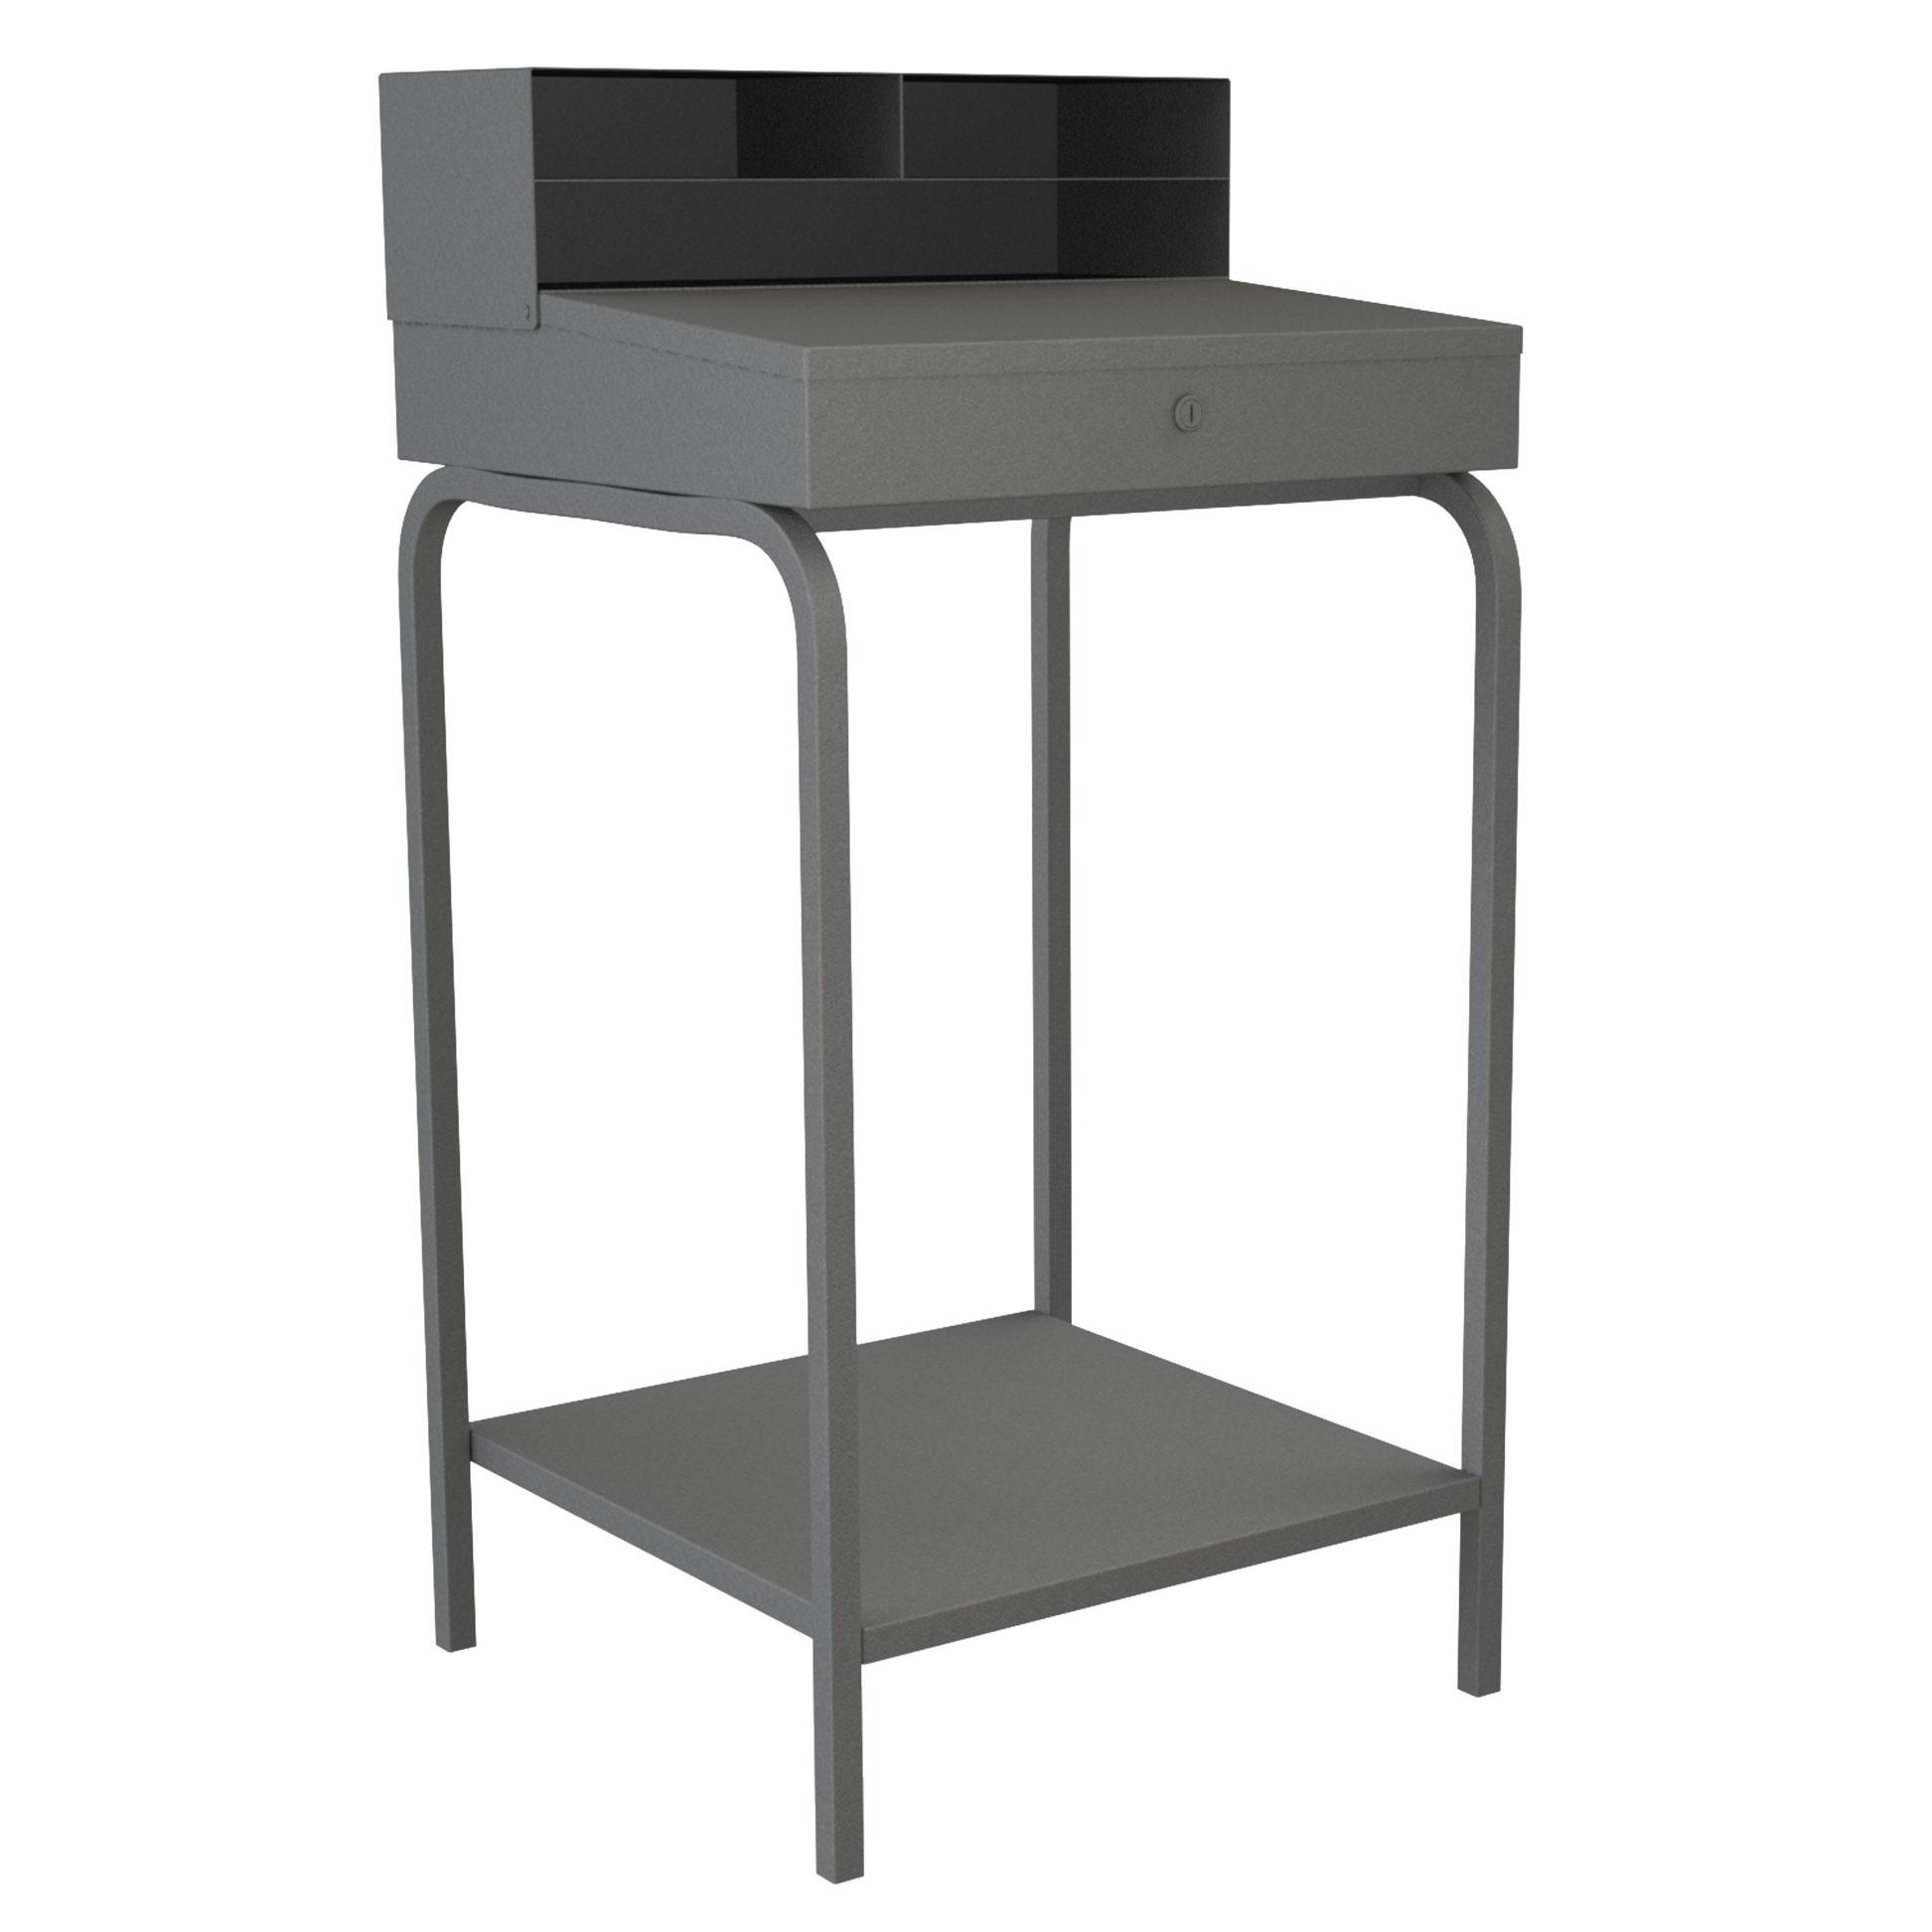 Product: MH40 Steel Powder Coat Receiving Desk - Choice Equipment Company